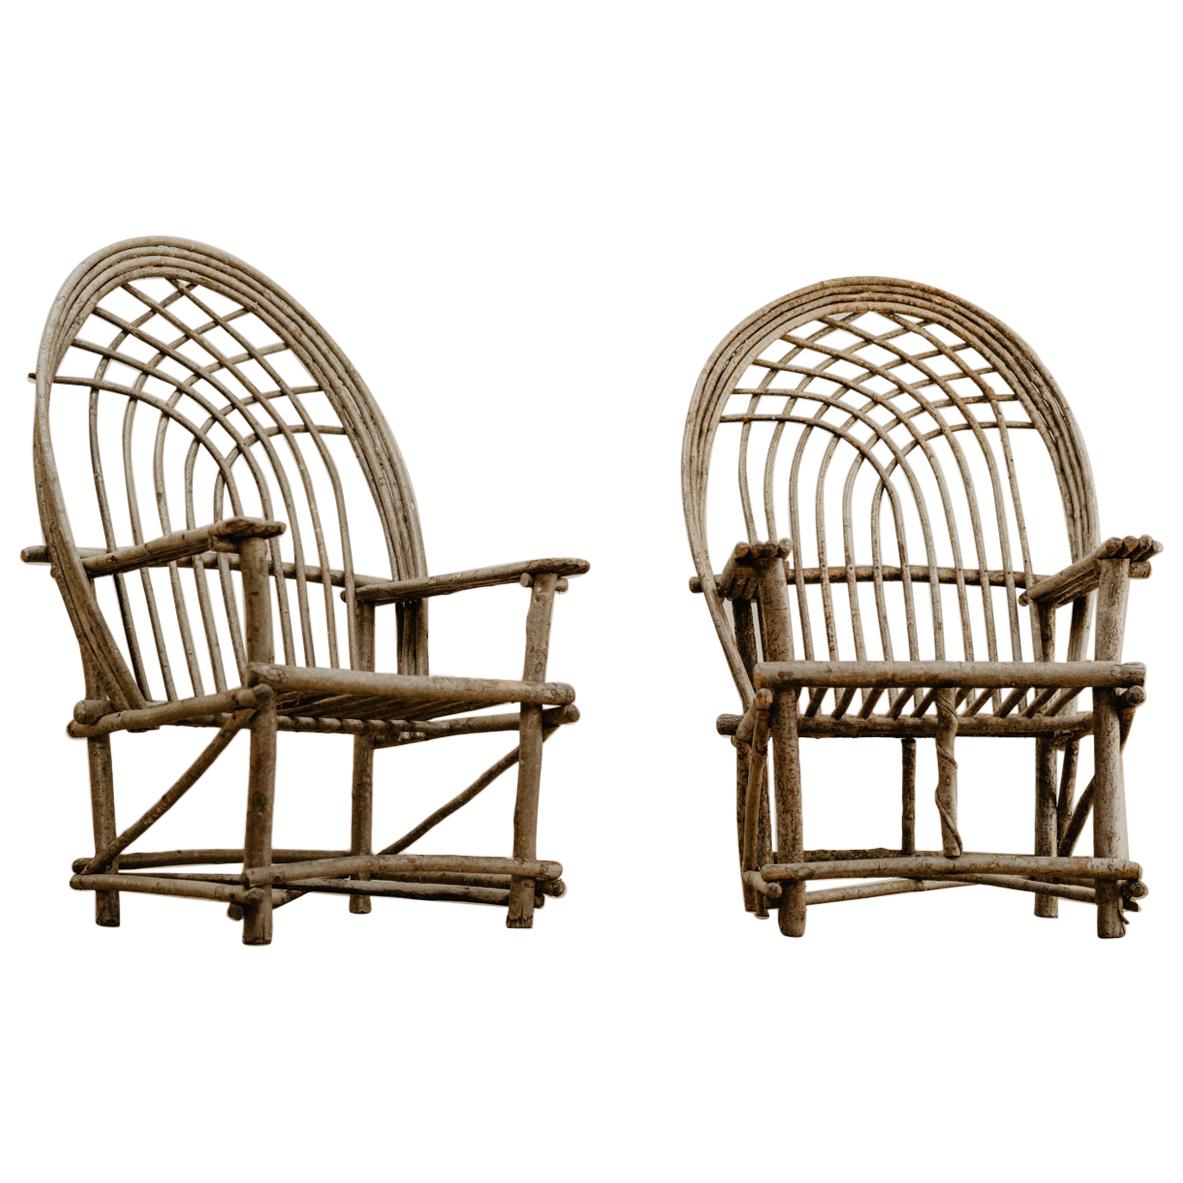 Pair of Twig Armchairs